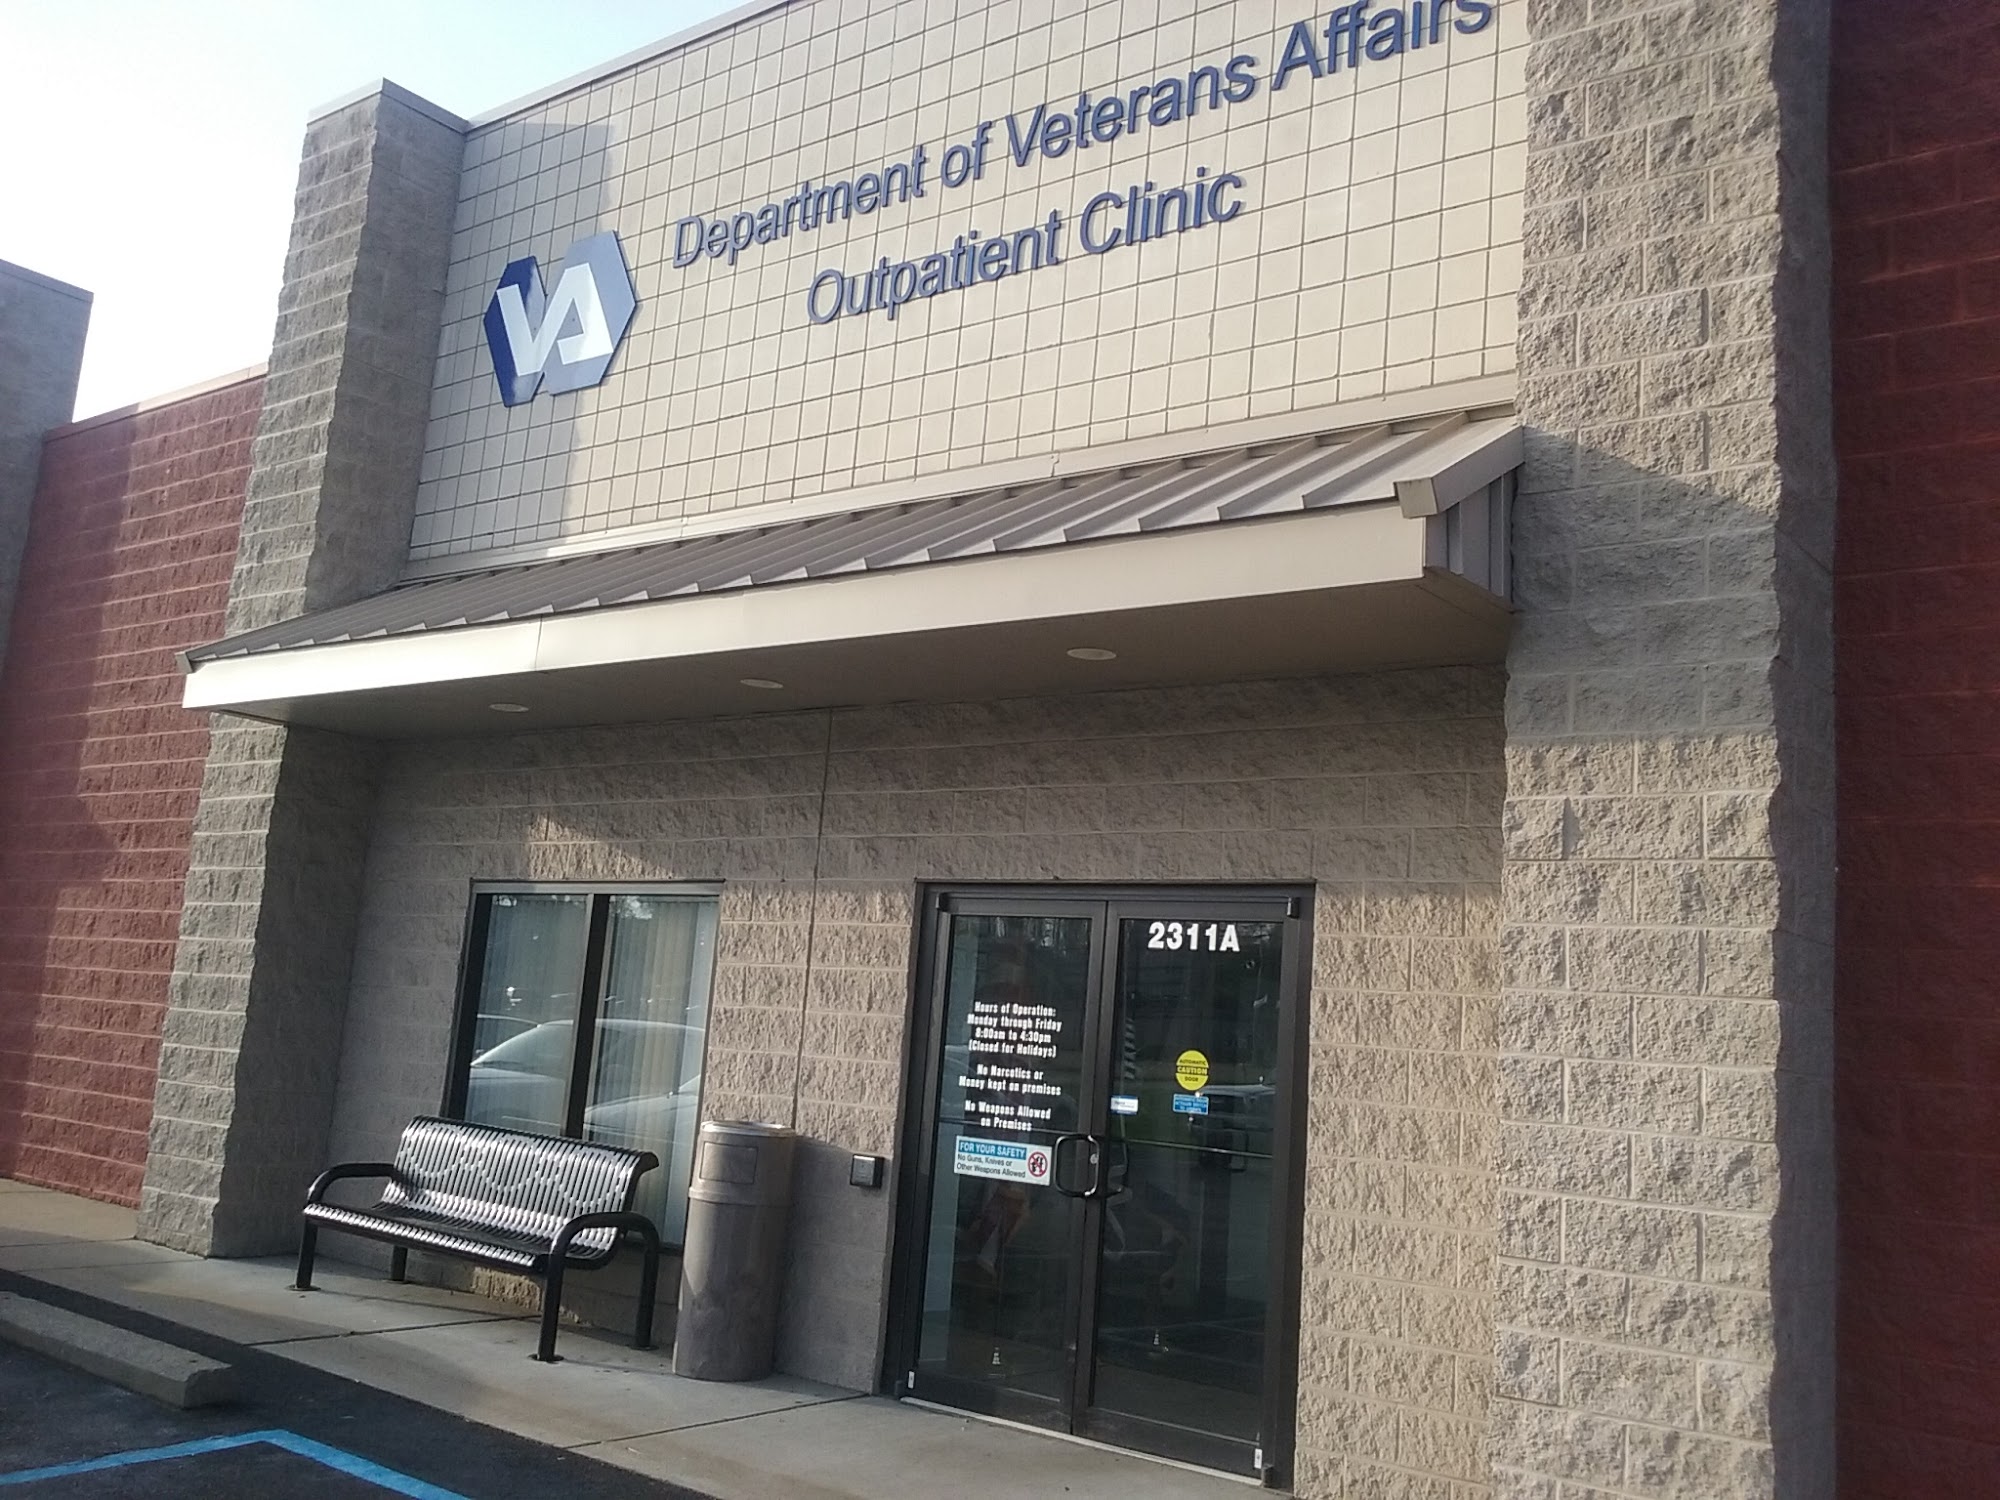 VA Outpatient Clinic - Wood County